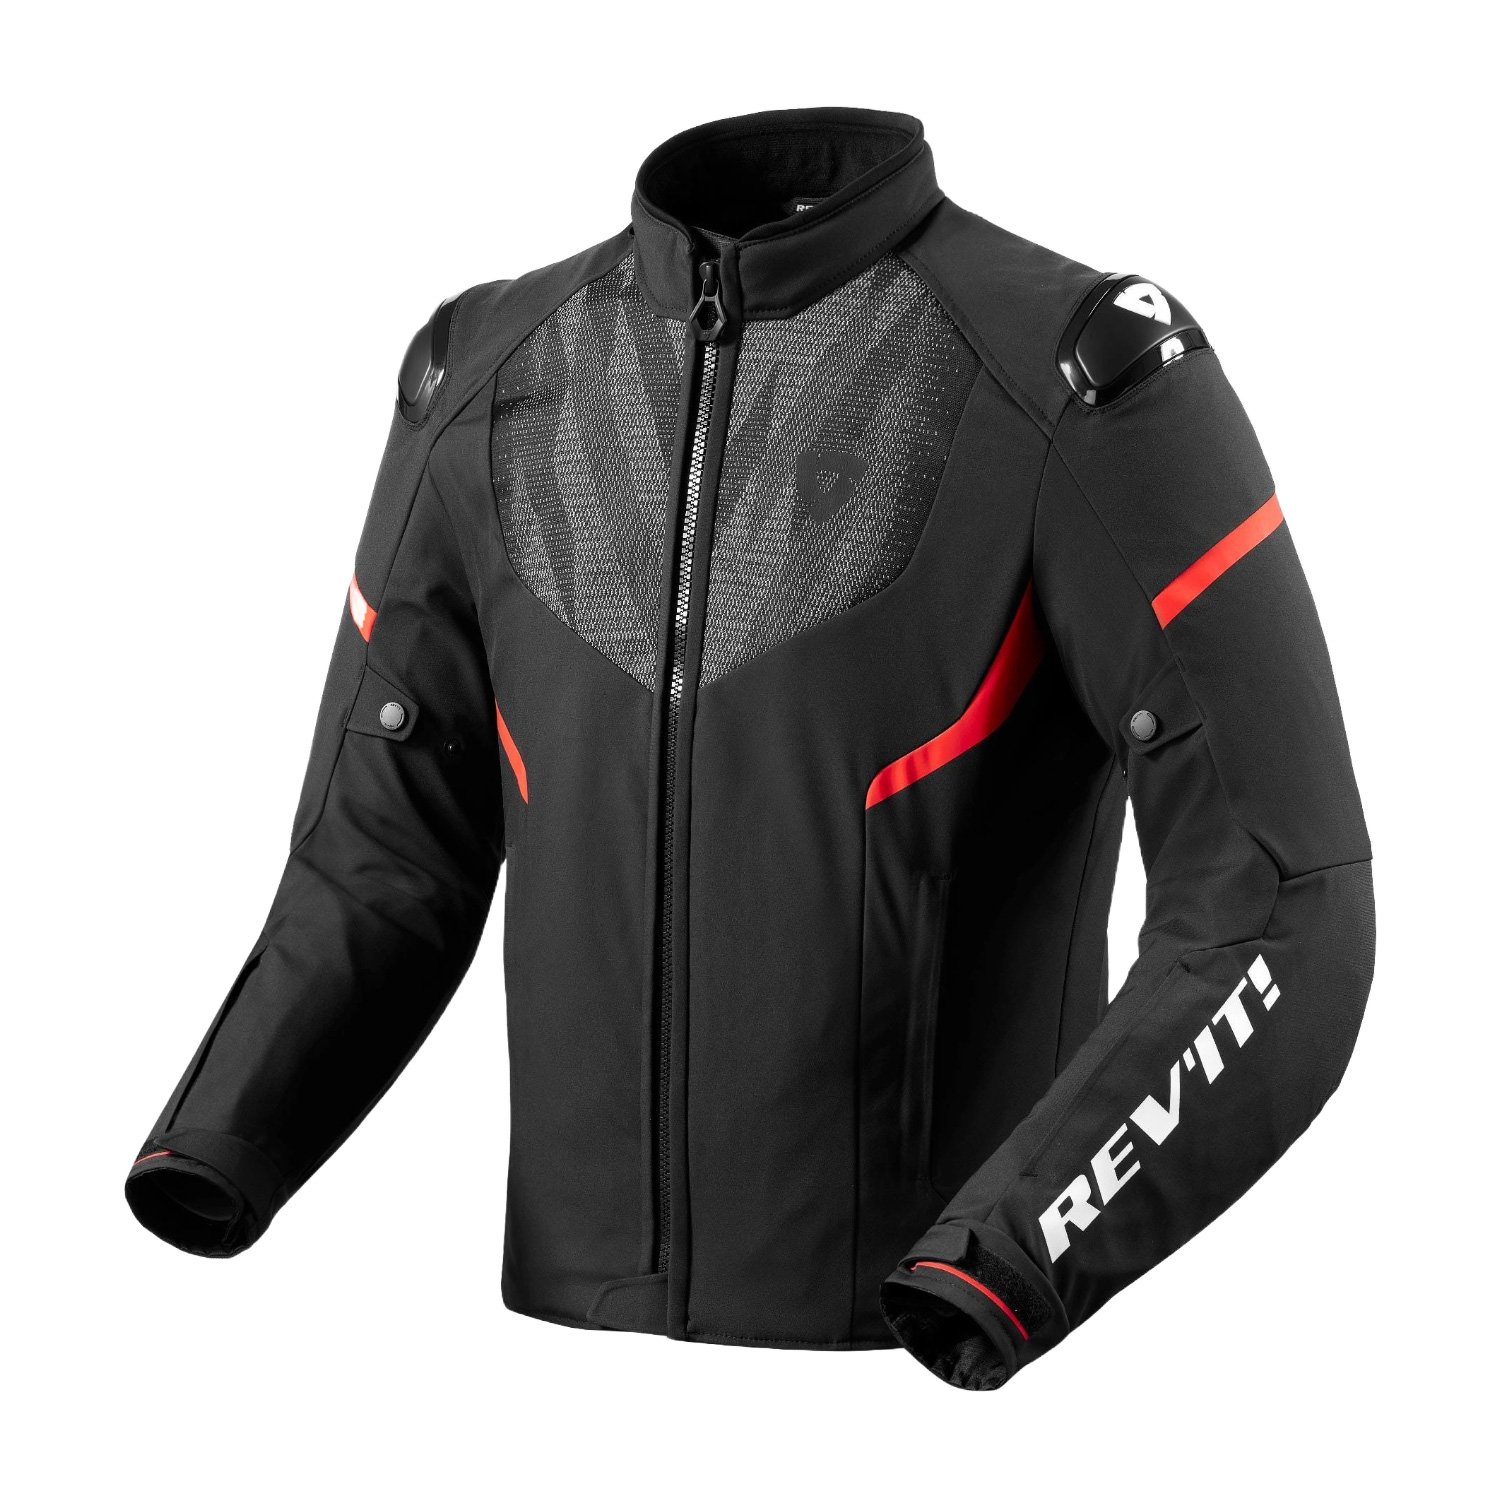 Image of REV'IT! Hyperspeed 2 H2O Jacket Black Neon Red Talla 3XL